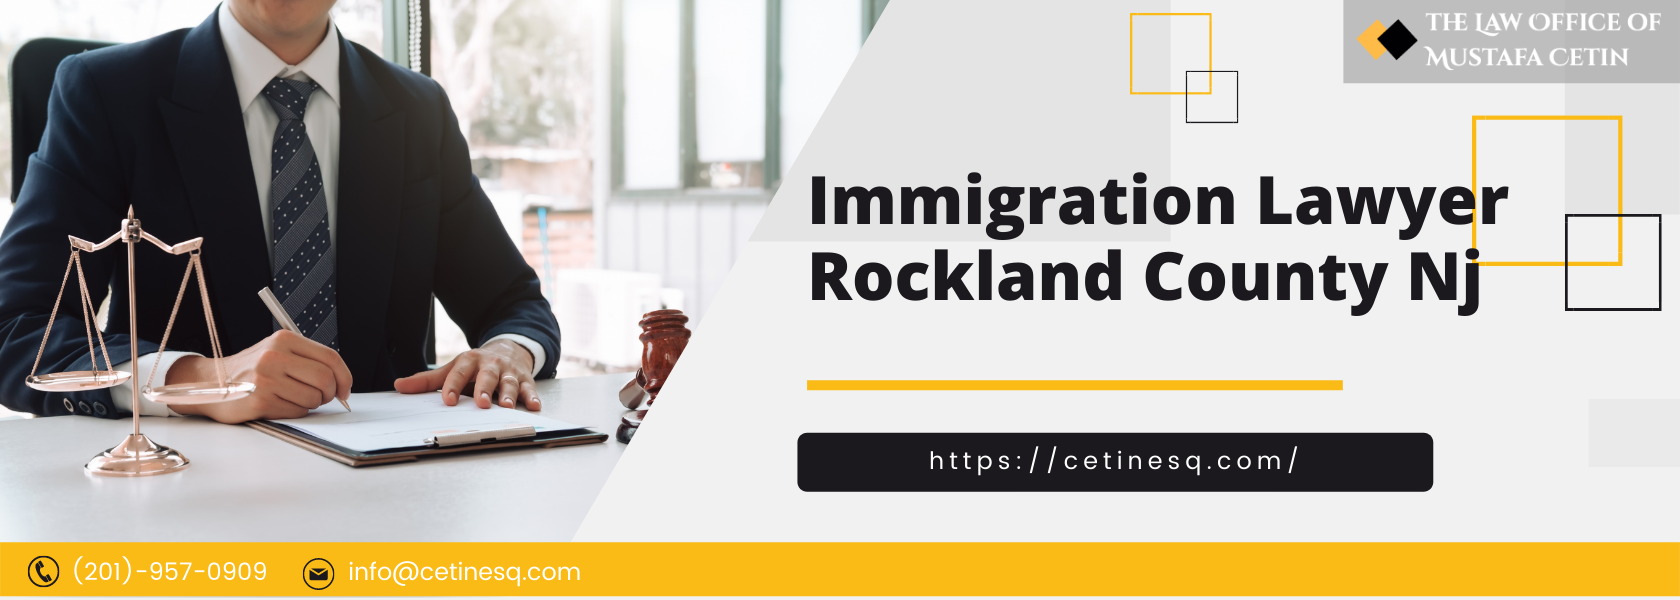 Immigration Lawyer Rockland County NY